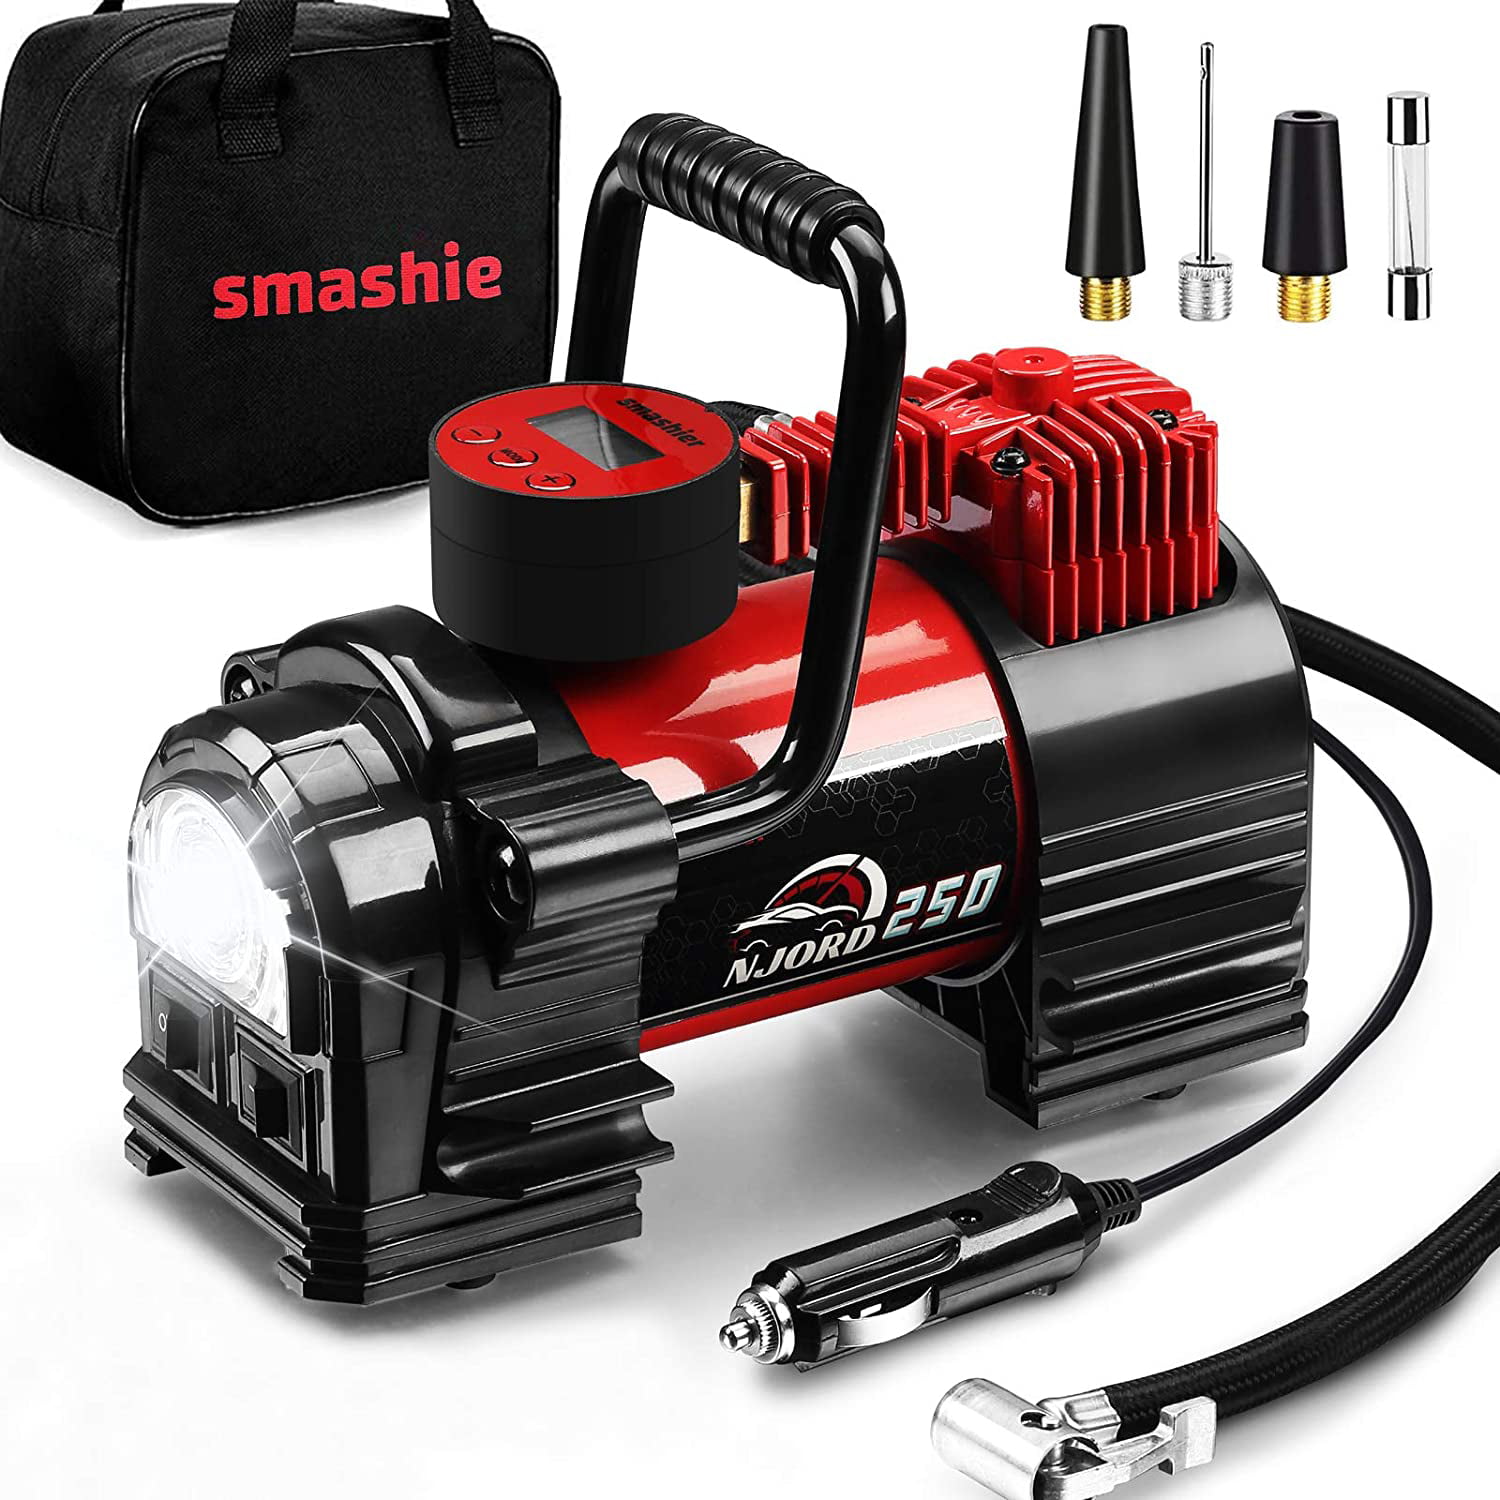 12V DC Heavy Duty Mini Digital Pump for Car/Motorcycle/Bike Smashier Portable Tire Inflator Air Compressor 12FT Extended Cord Upgraded Quick Connector,Fast Inflation 